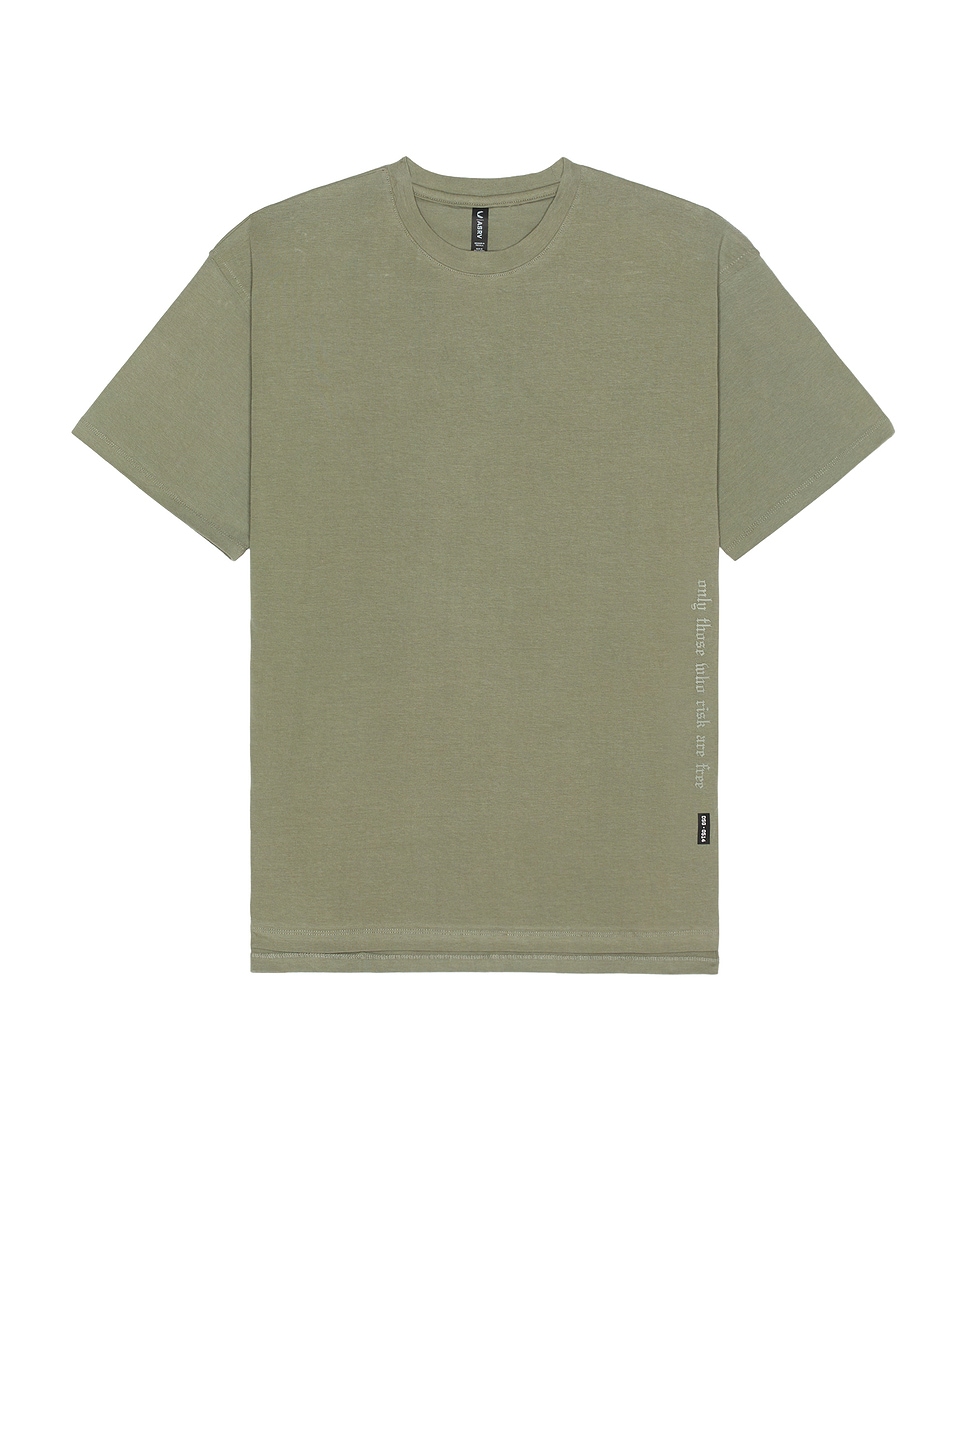 Image 1 of ASRV Cotton Plus Oversized Tee in Sage